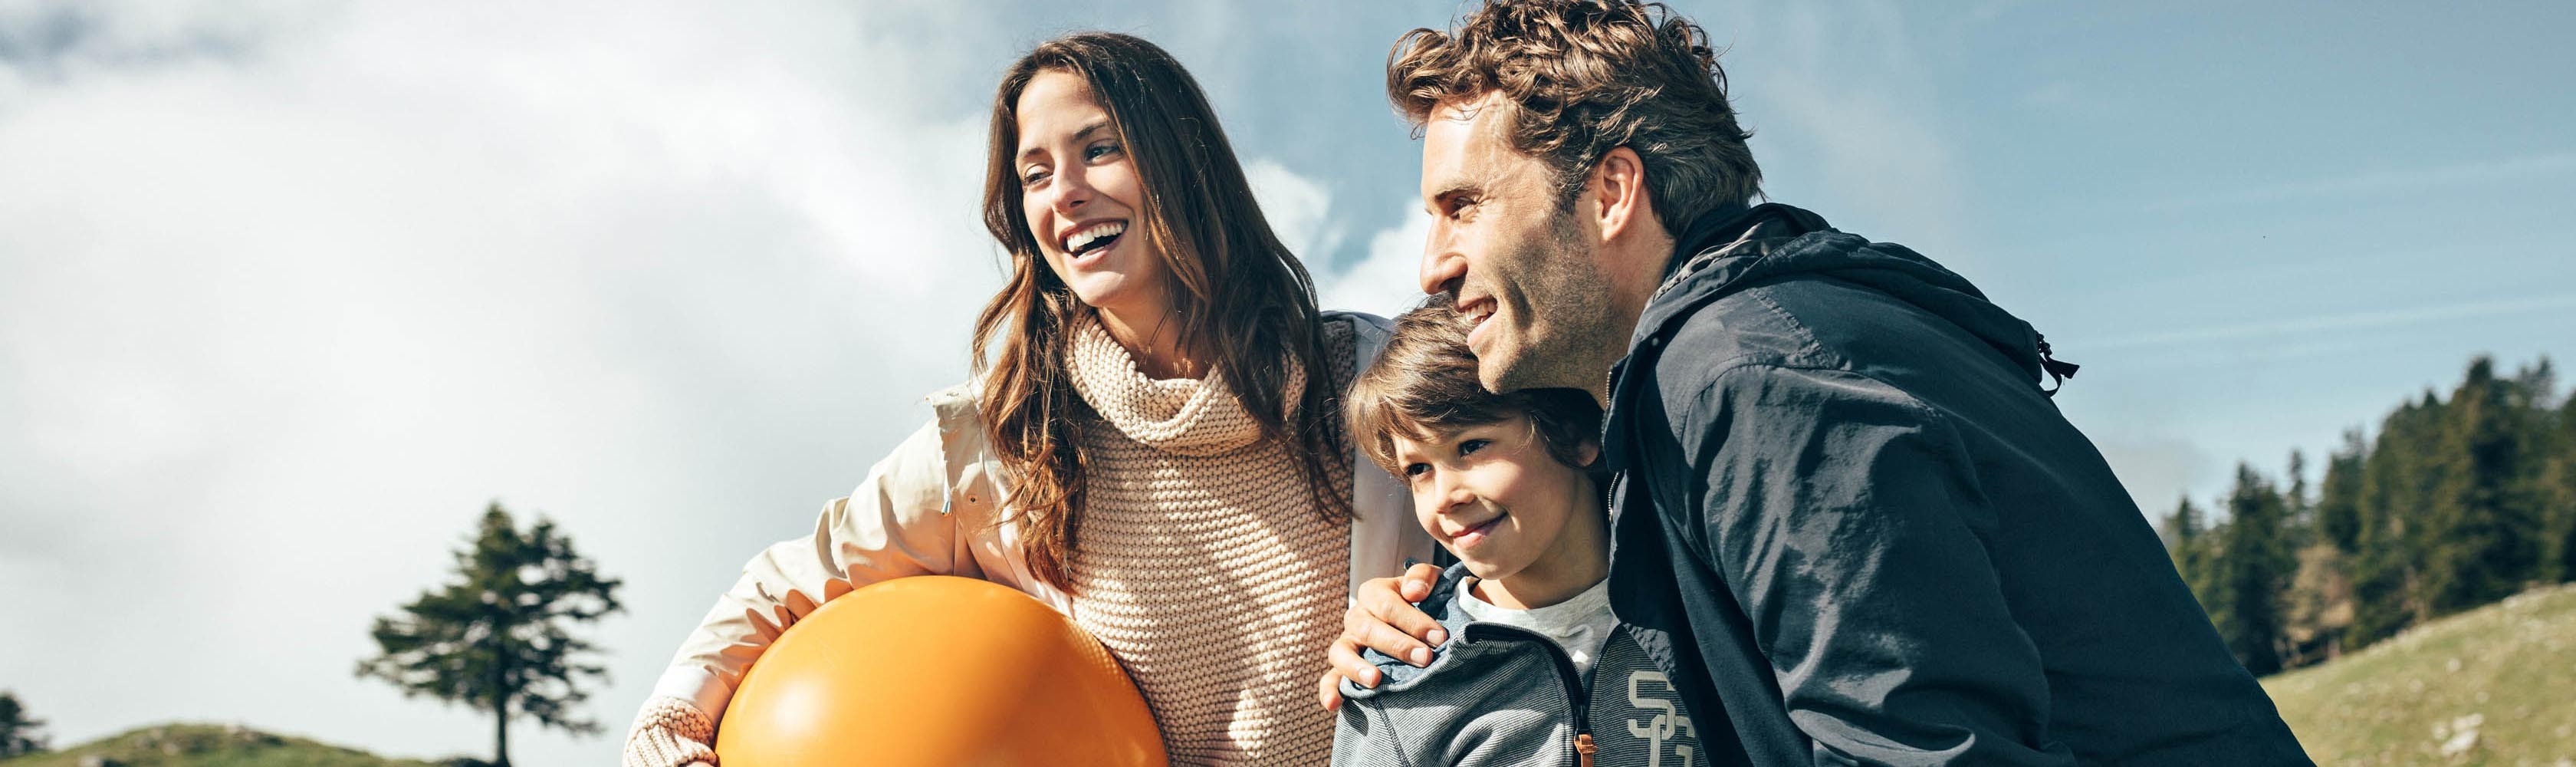 The family insurance by CONCORDIA offers more for families.